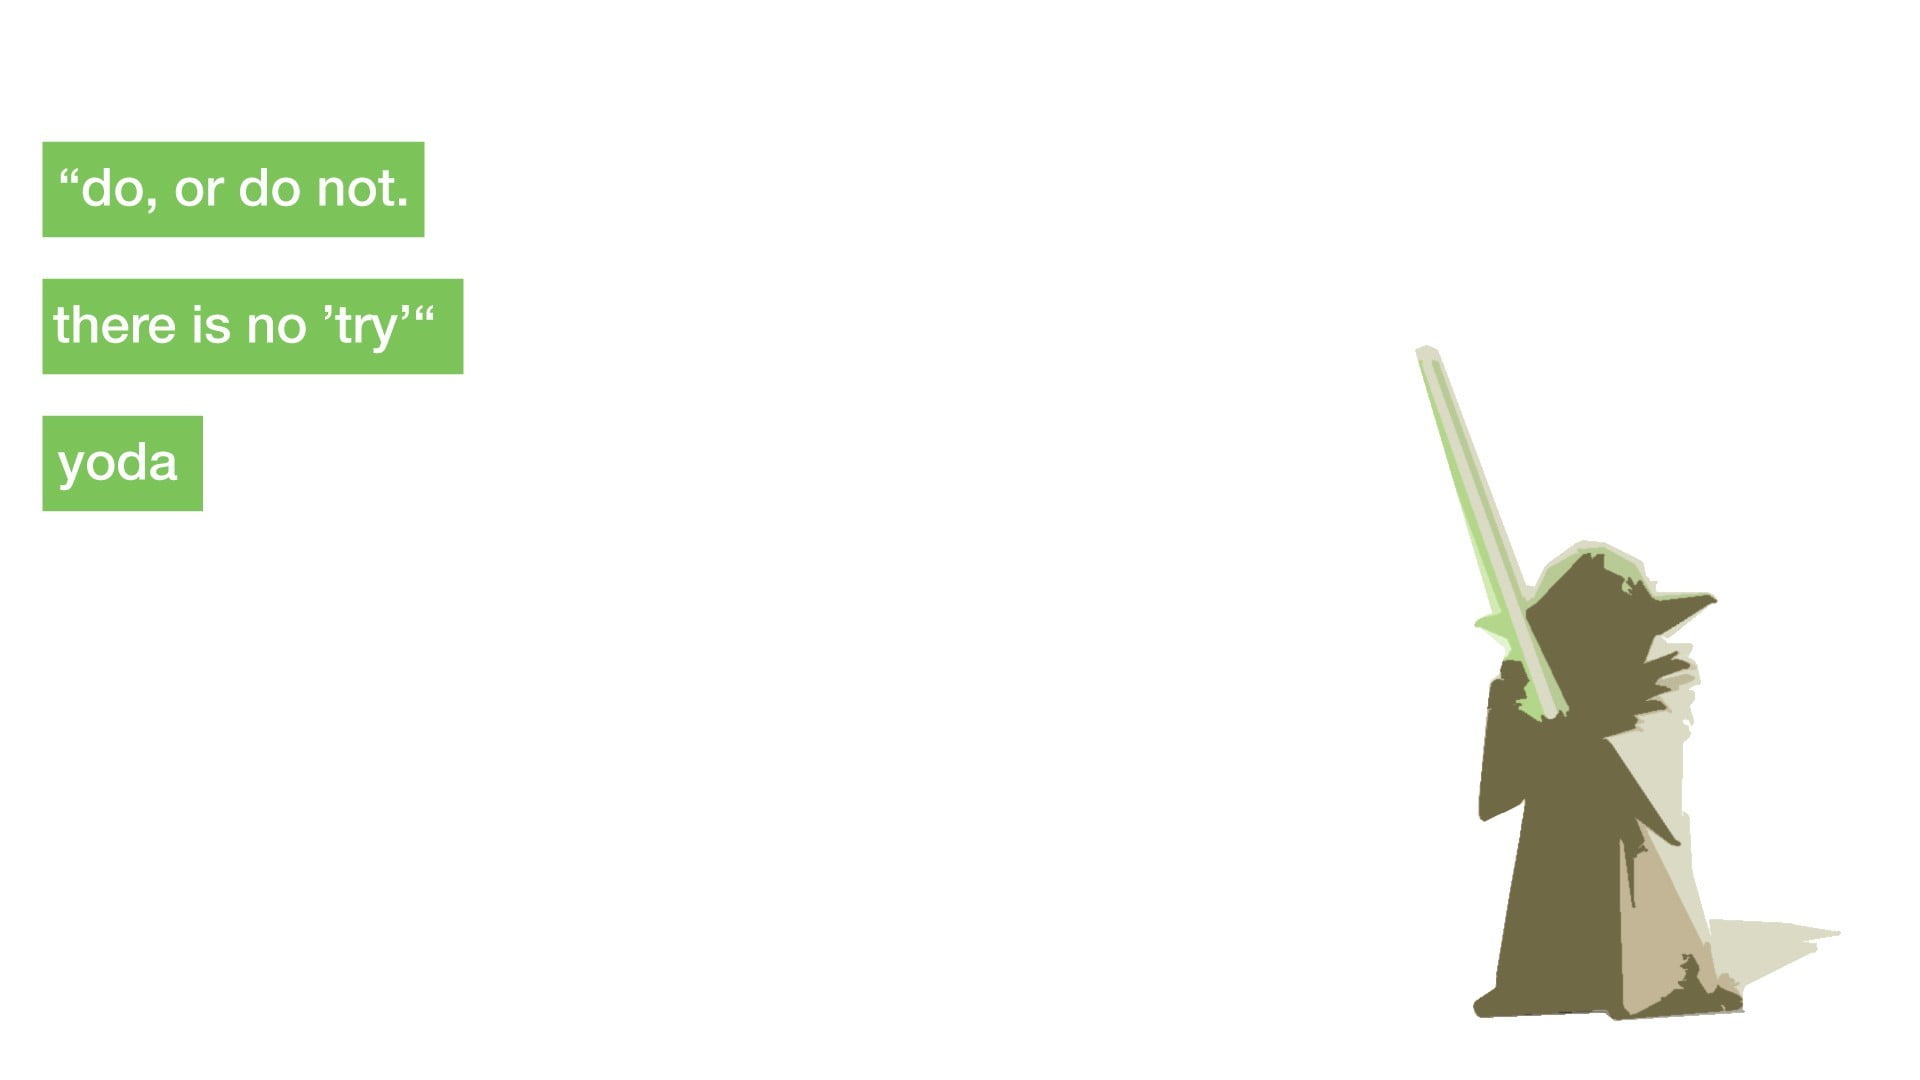 Yoda, Star Wars, minimalism, white background, copy space, green color